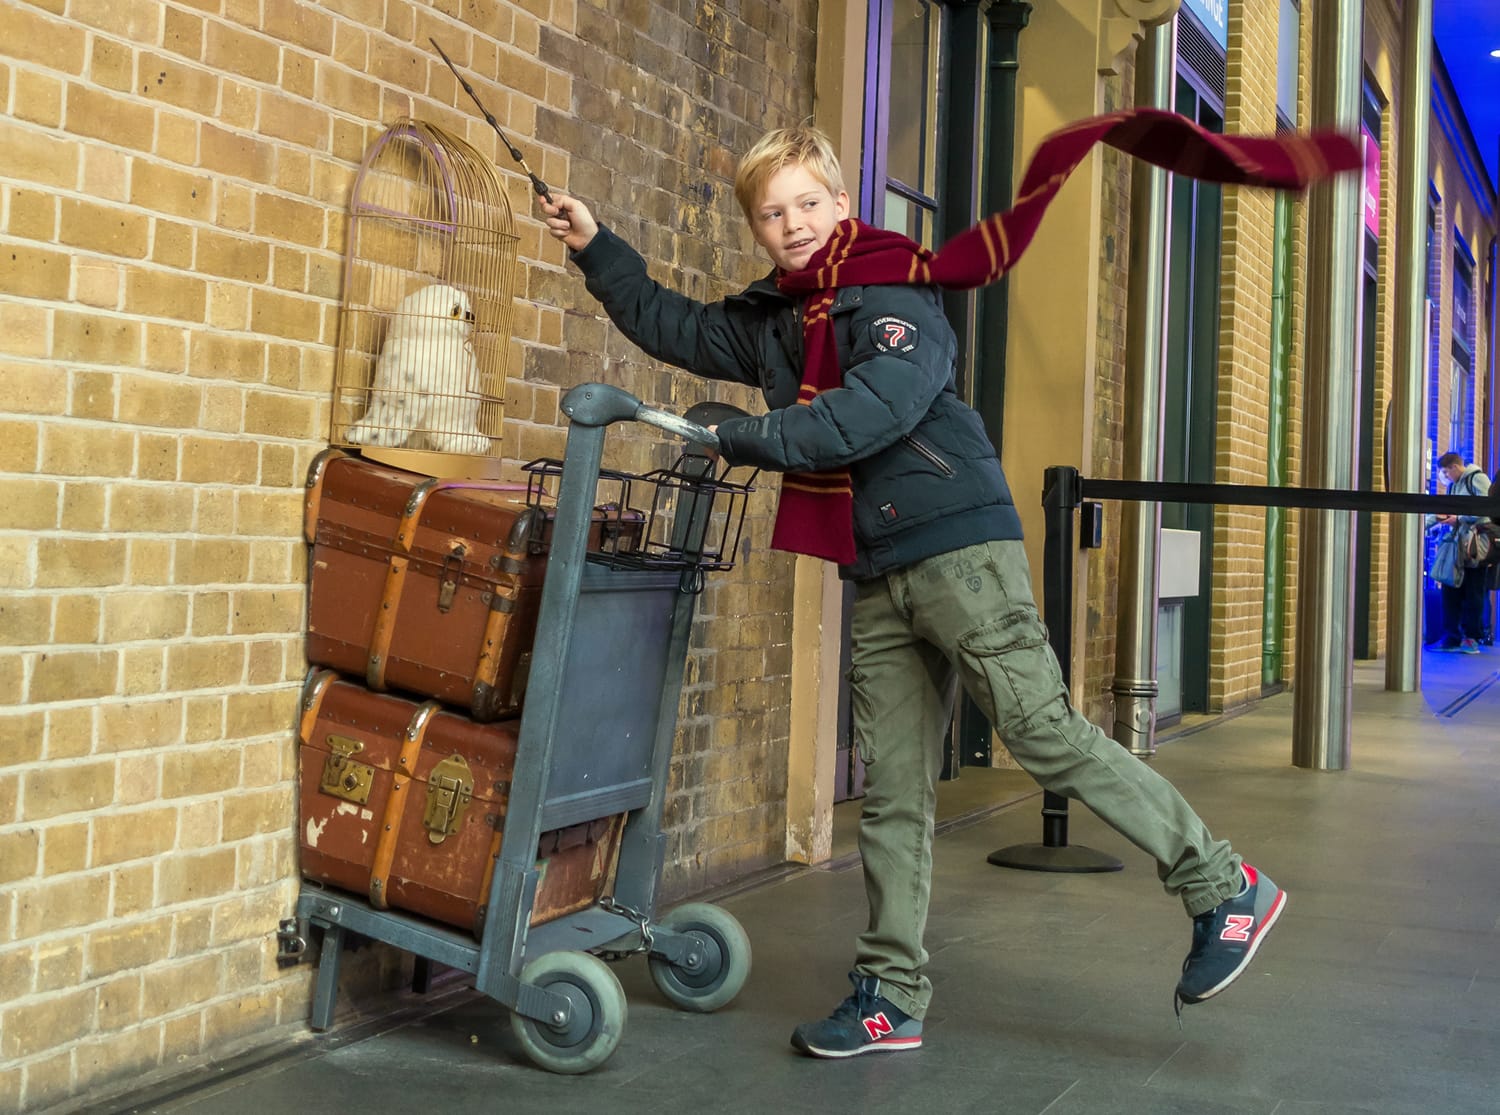 Kings Cross station wall visited by fans of Harry Potter 